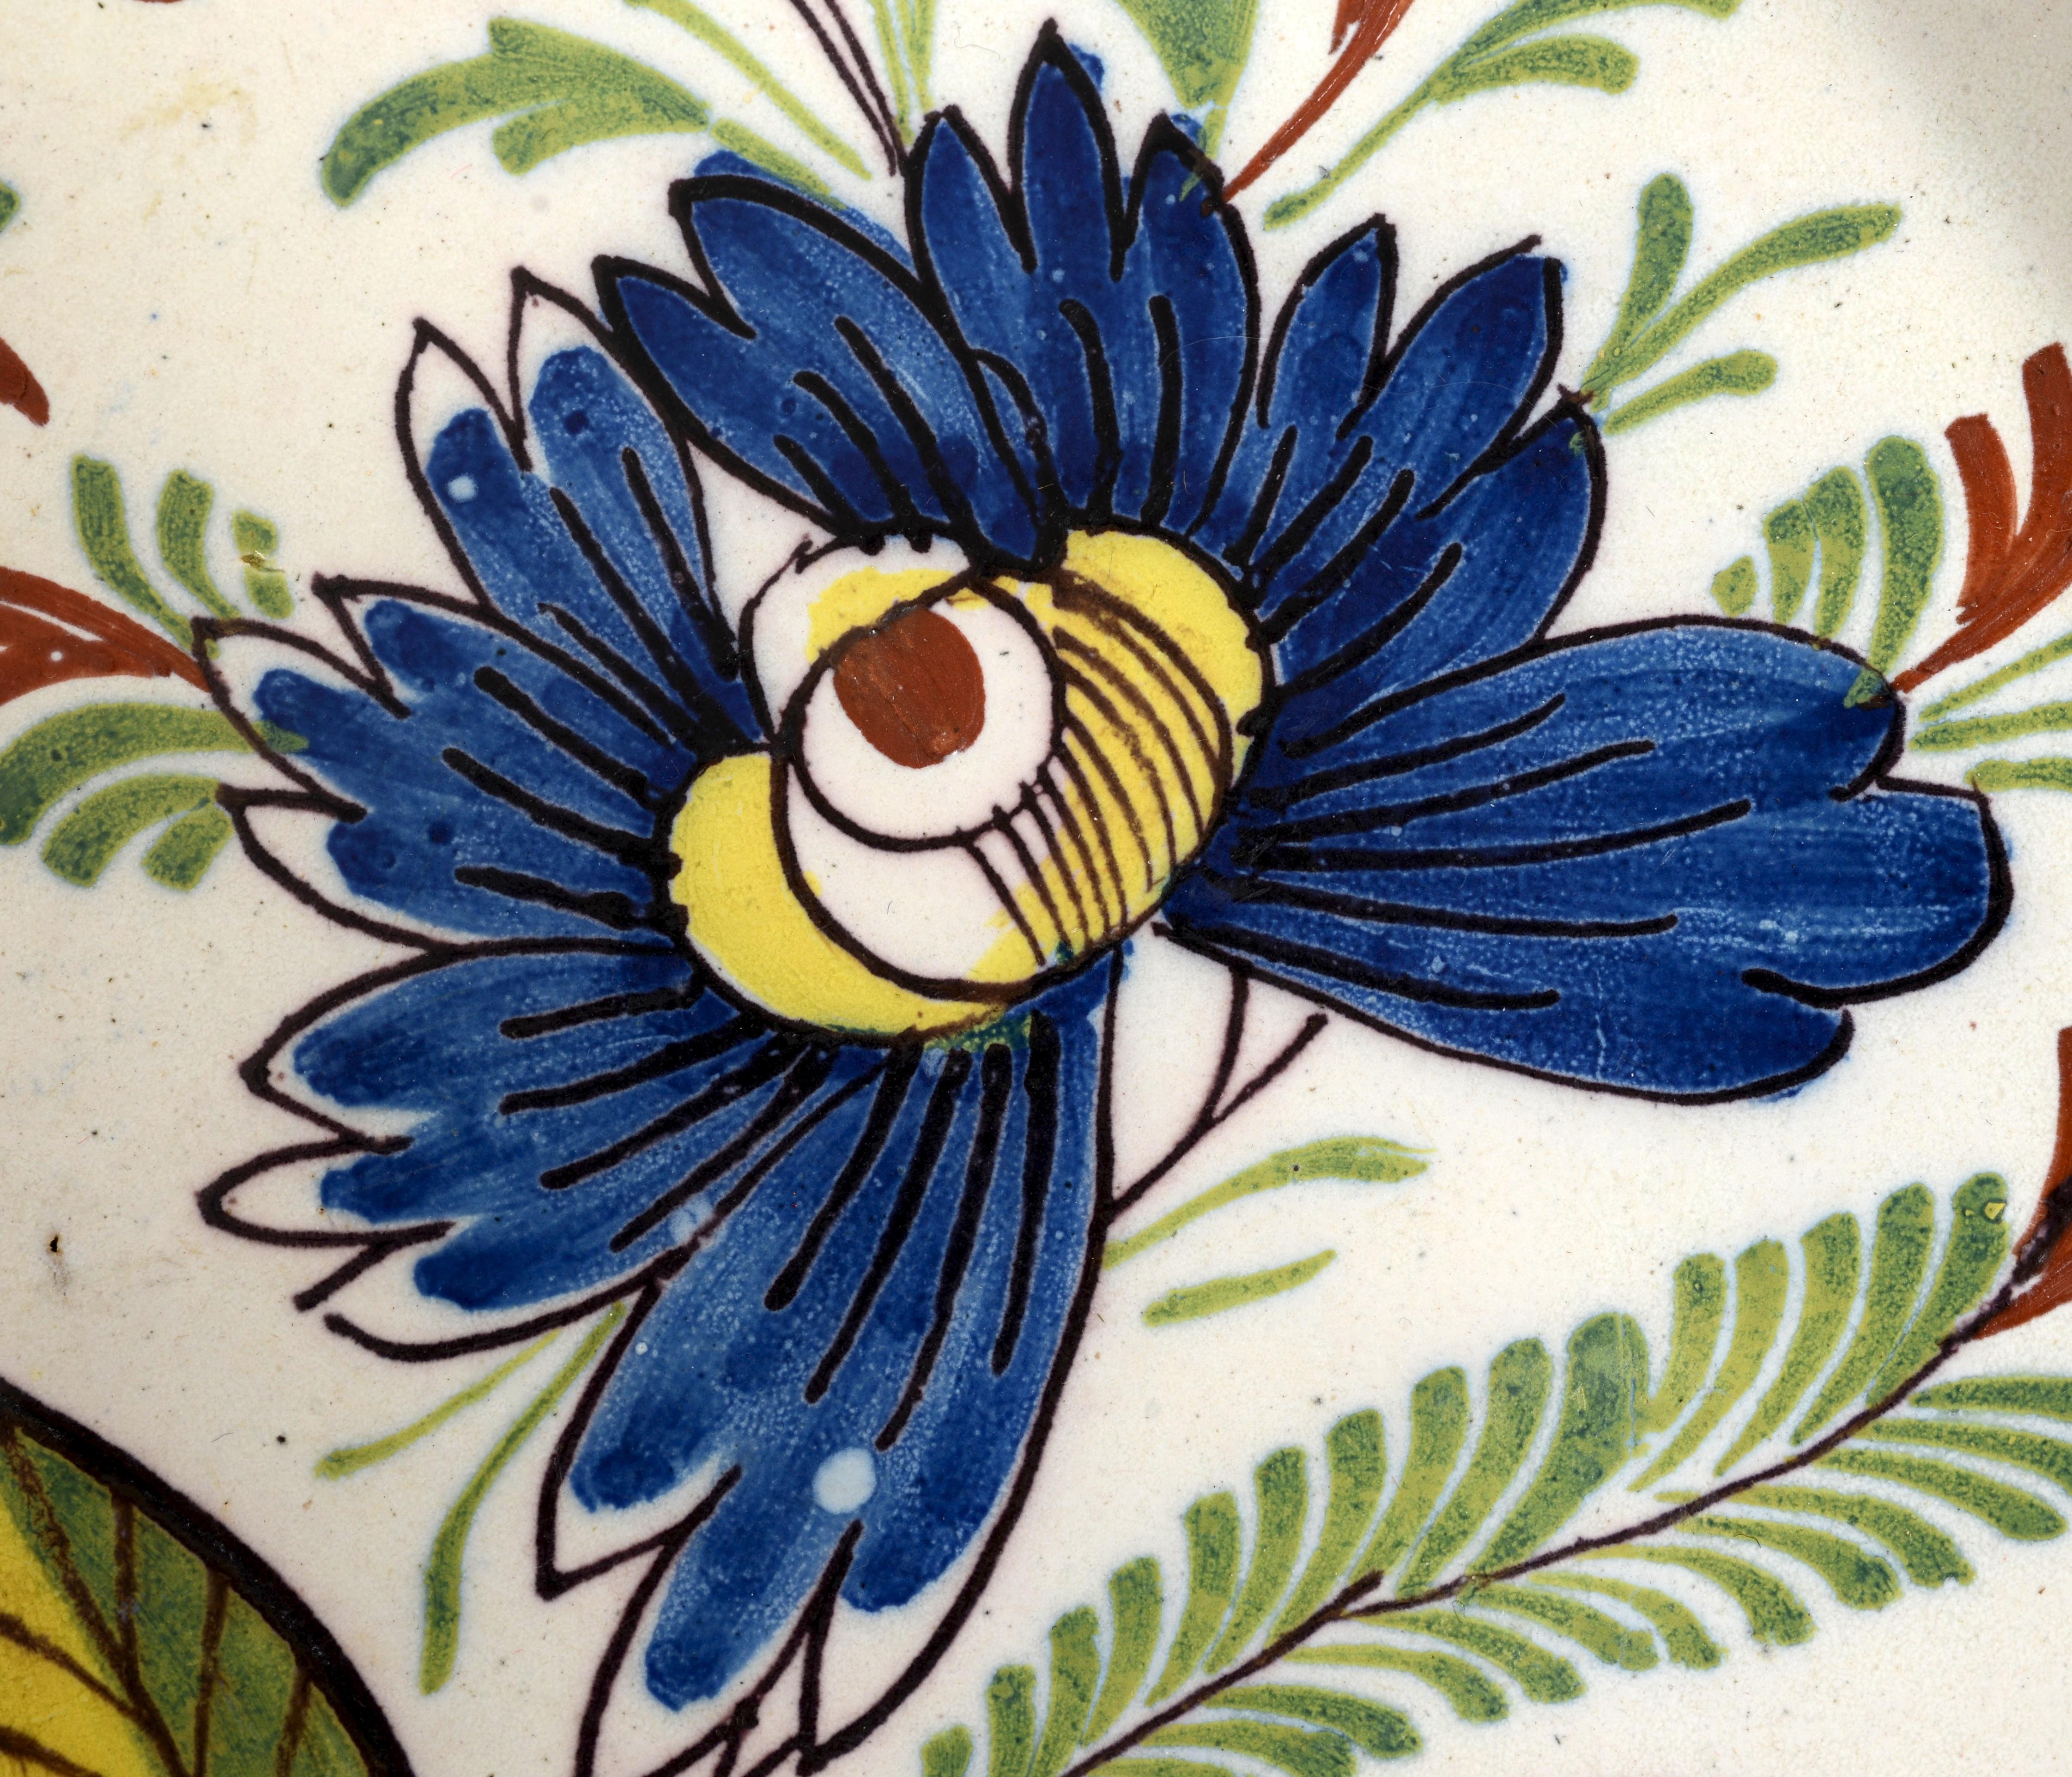 A fine 18th c Dutch Polychrome painted delft charger, decorated with vibrantly colored stylized tulips and flowers painted in manganese, green, yellow and blue. The sloped rim is painted with flowers and leaves. The center of the dished charger is